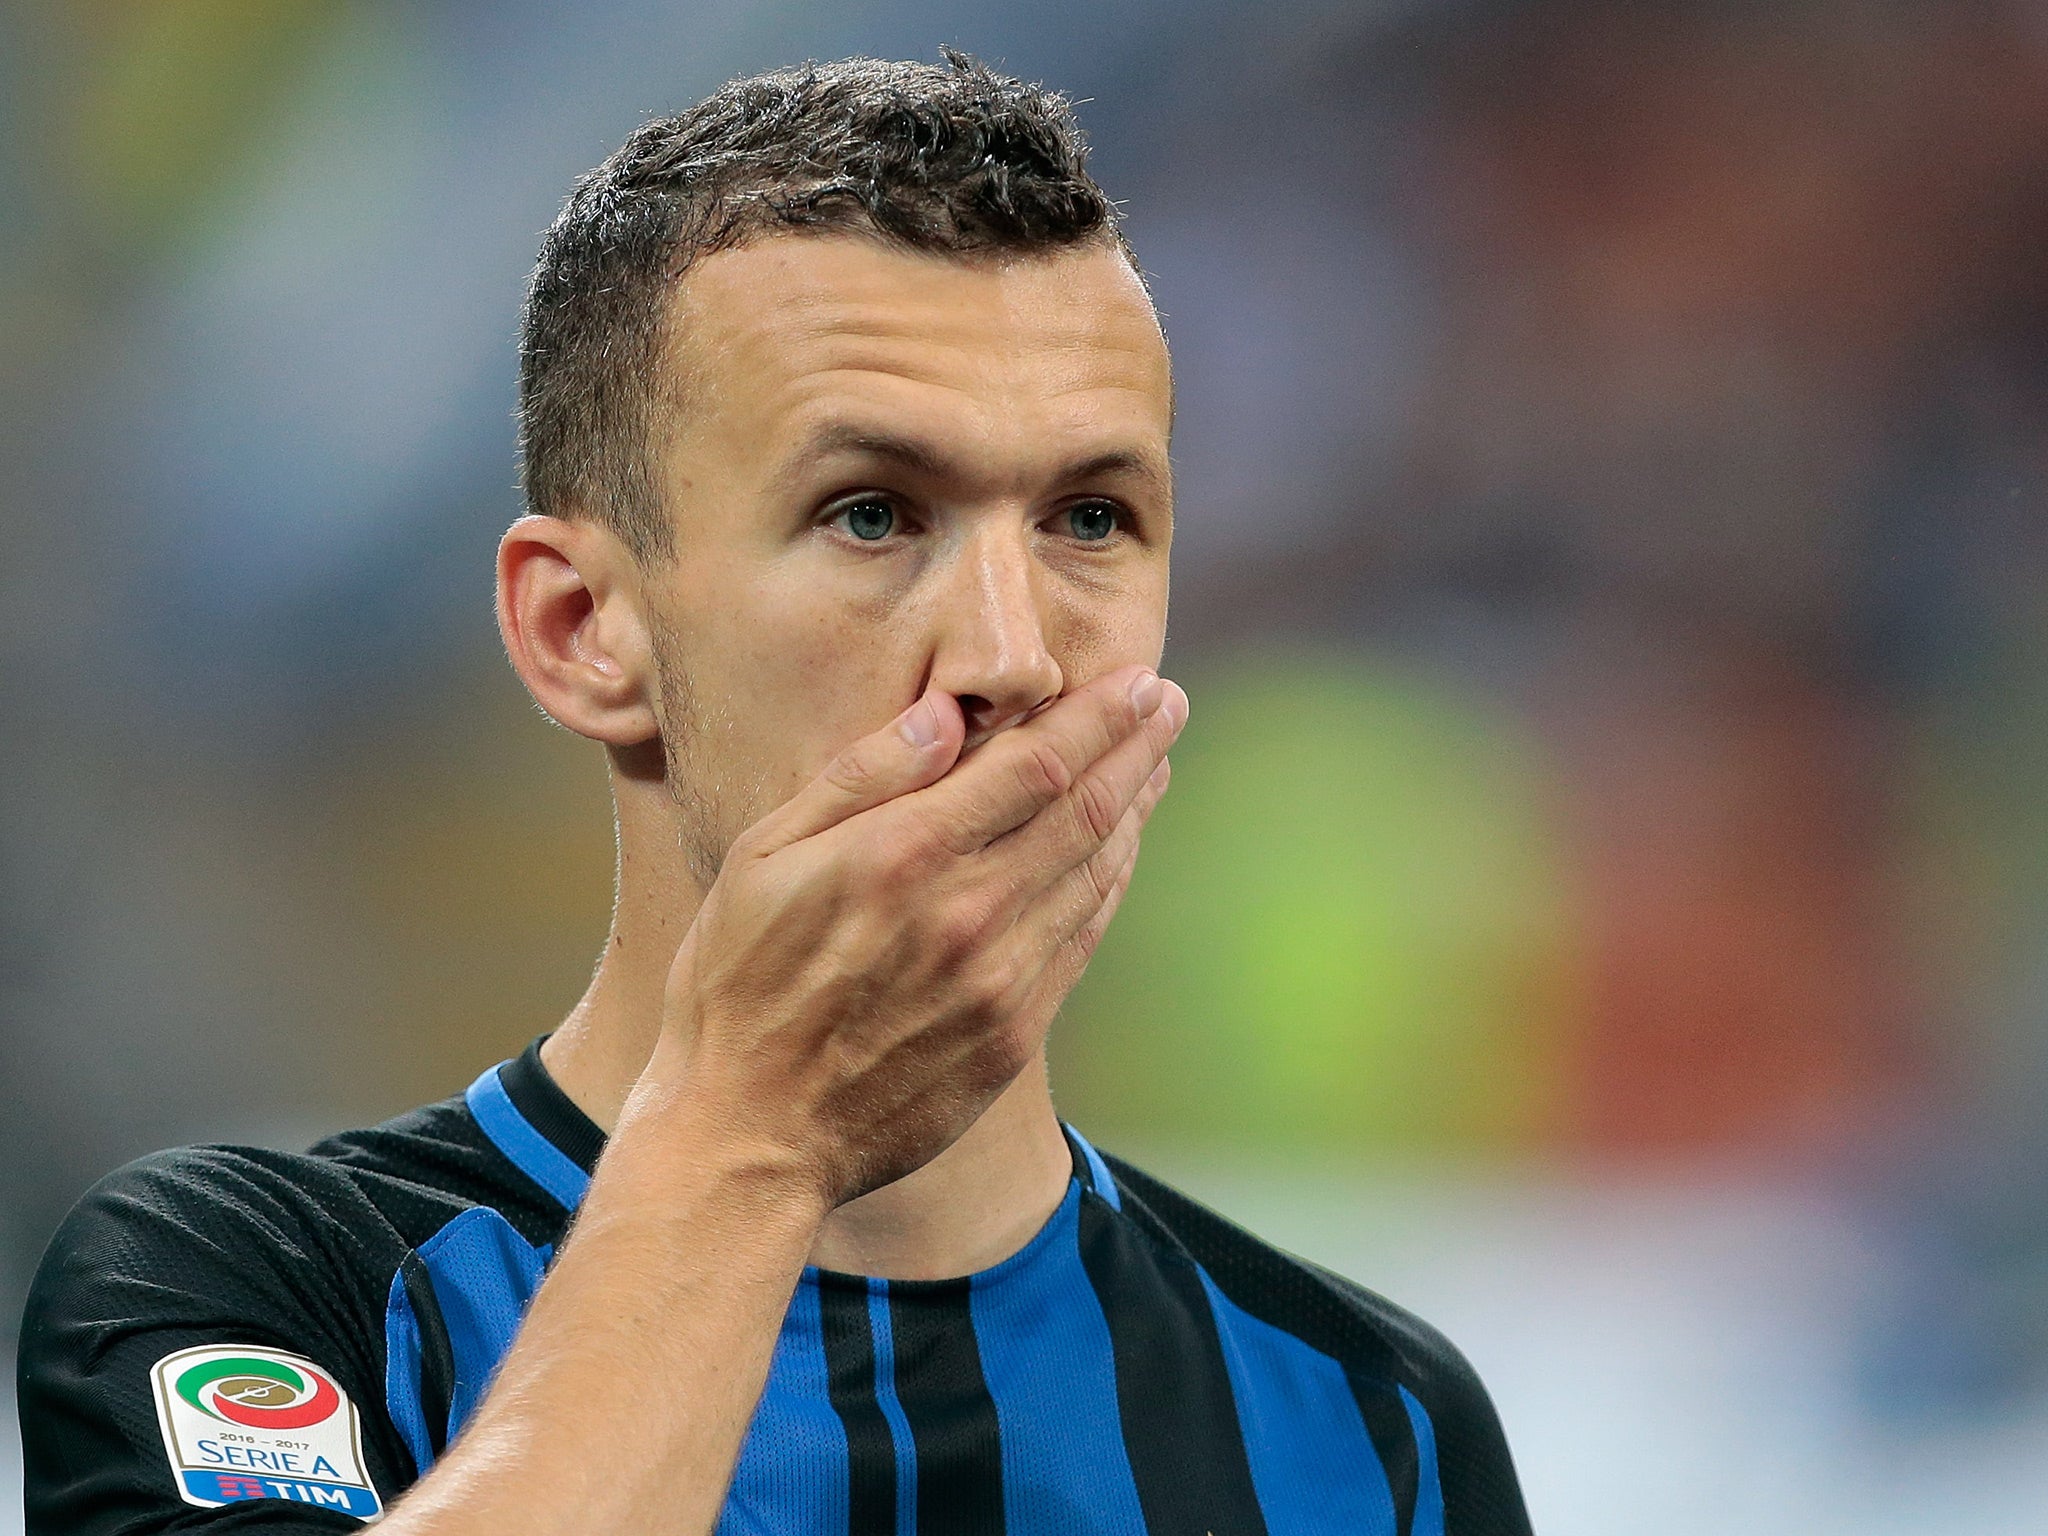 Manchester United hope to complete a deal for Ivan Perisic by the end of the month